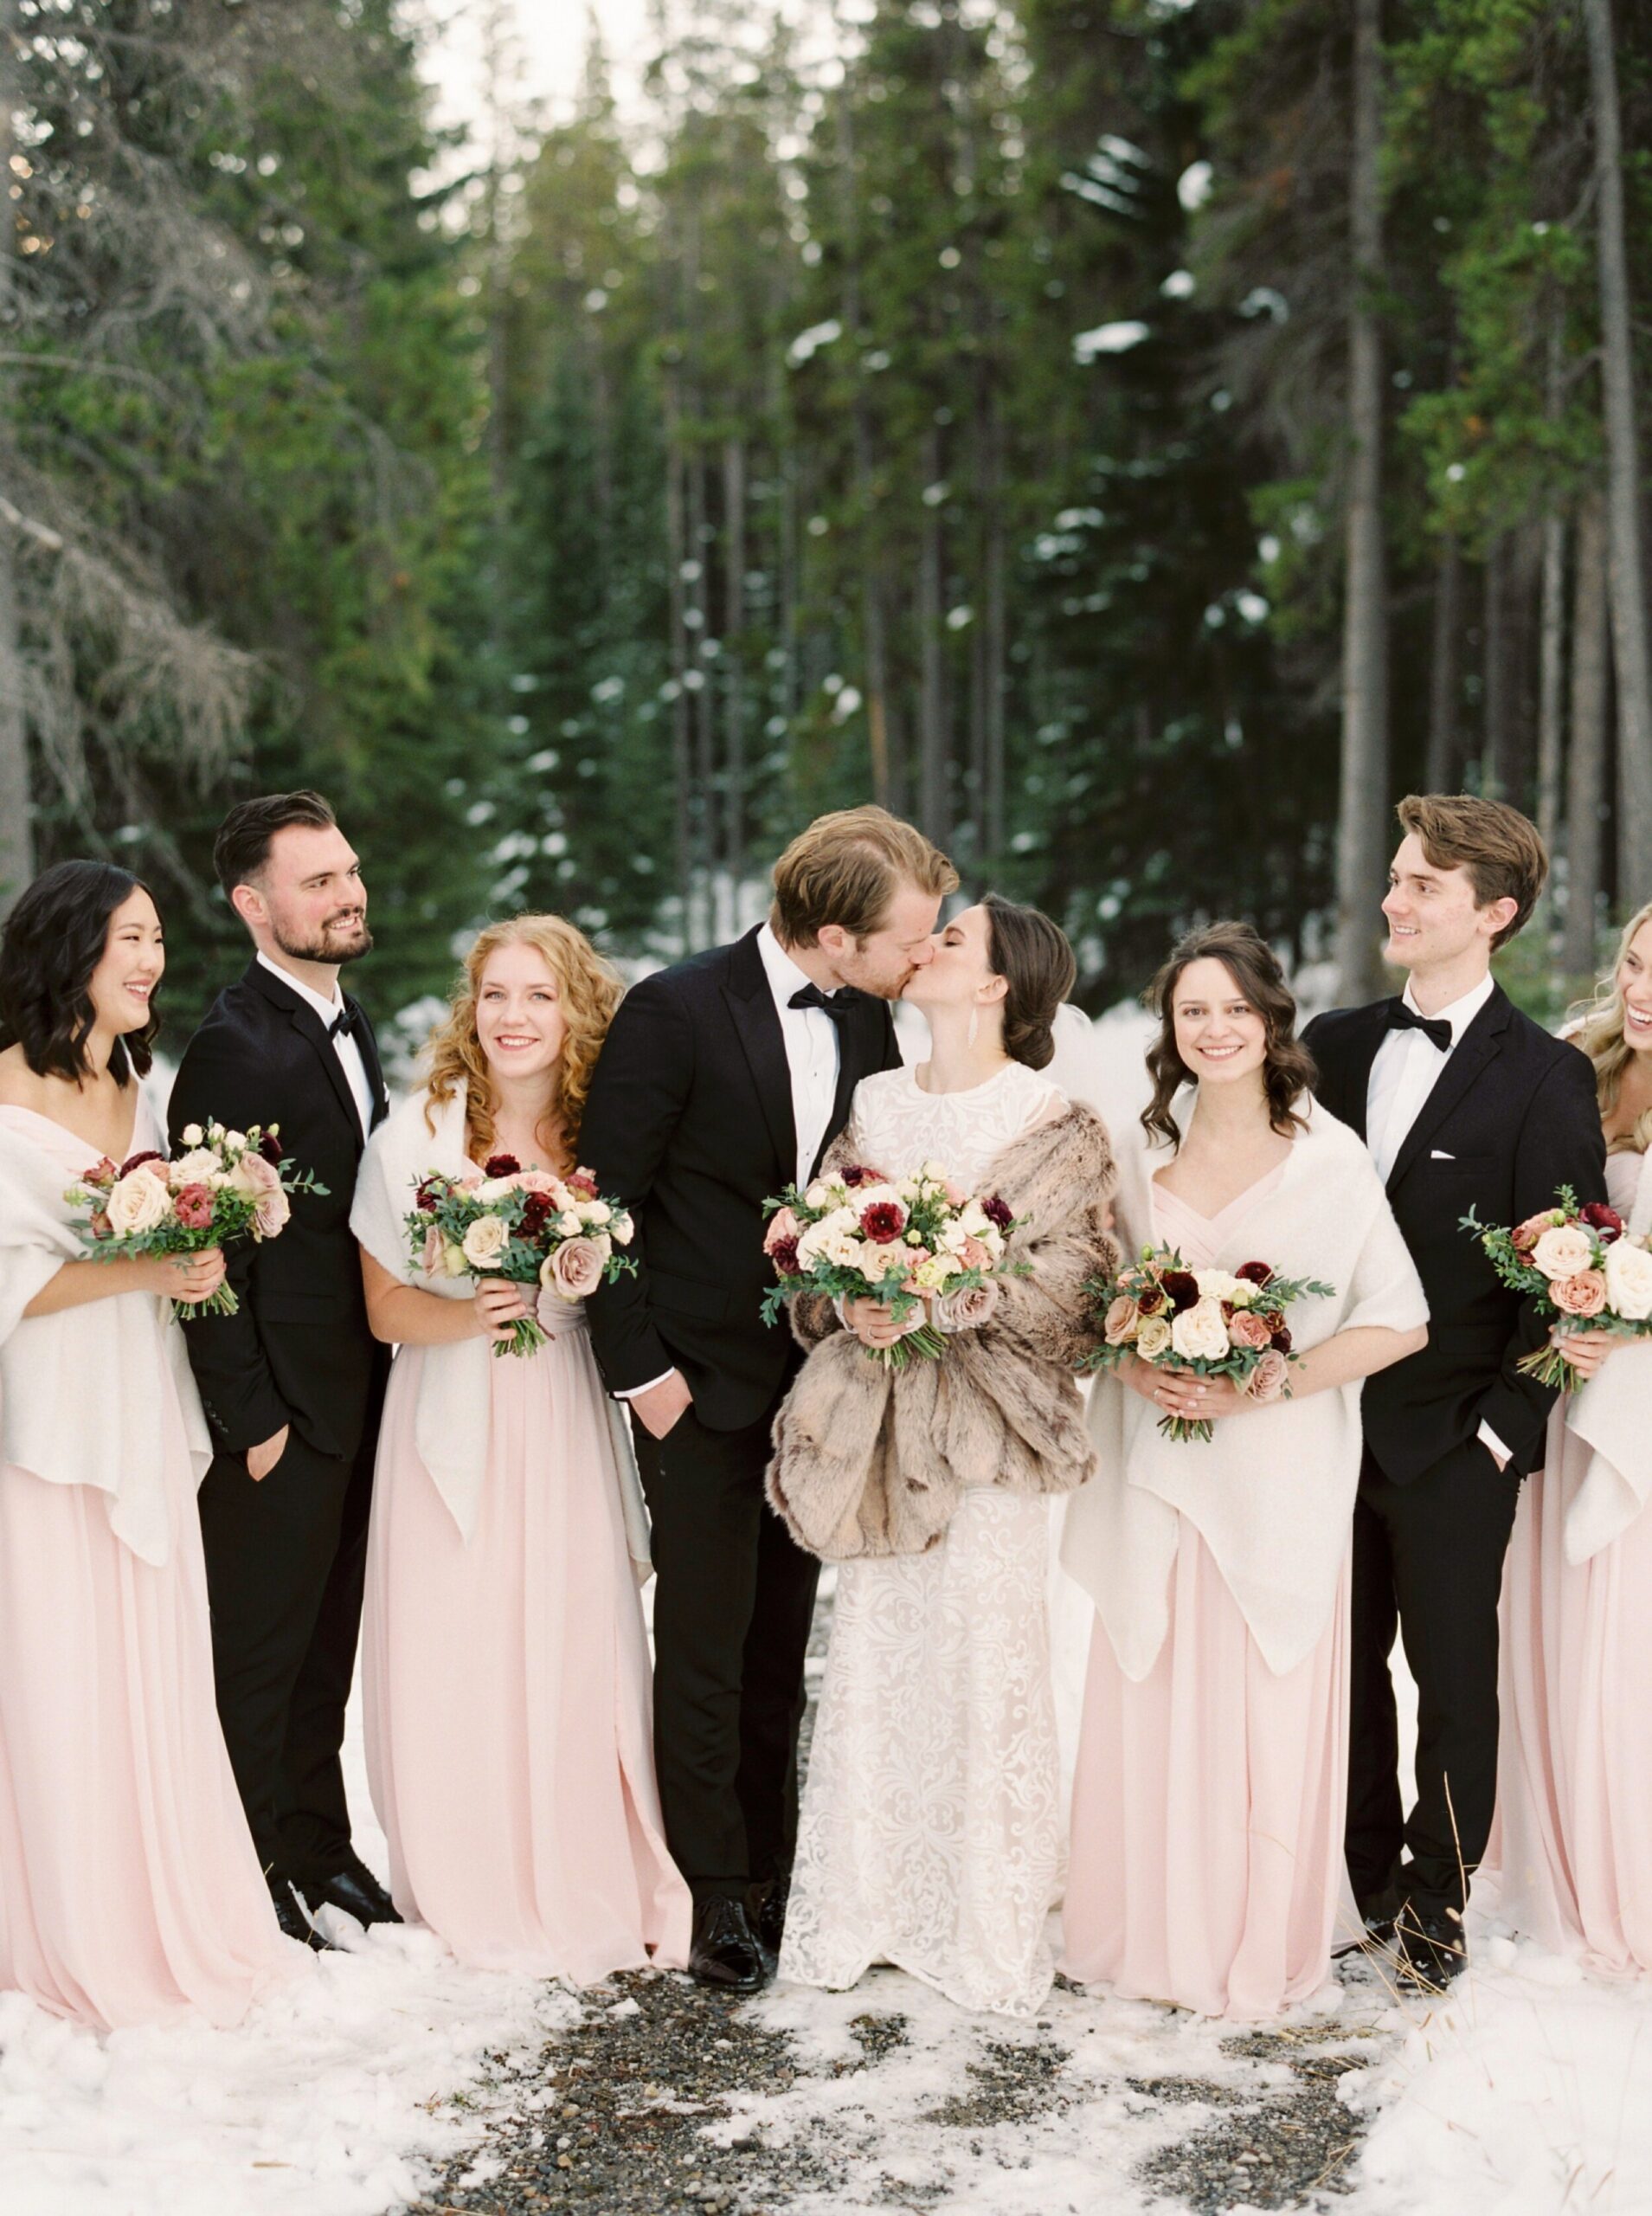  Blush winter bridesmaids outfits with fur stolls and modern pops of color bridal bouquet 